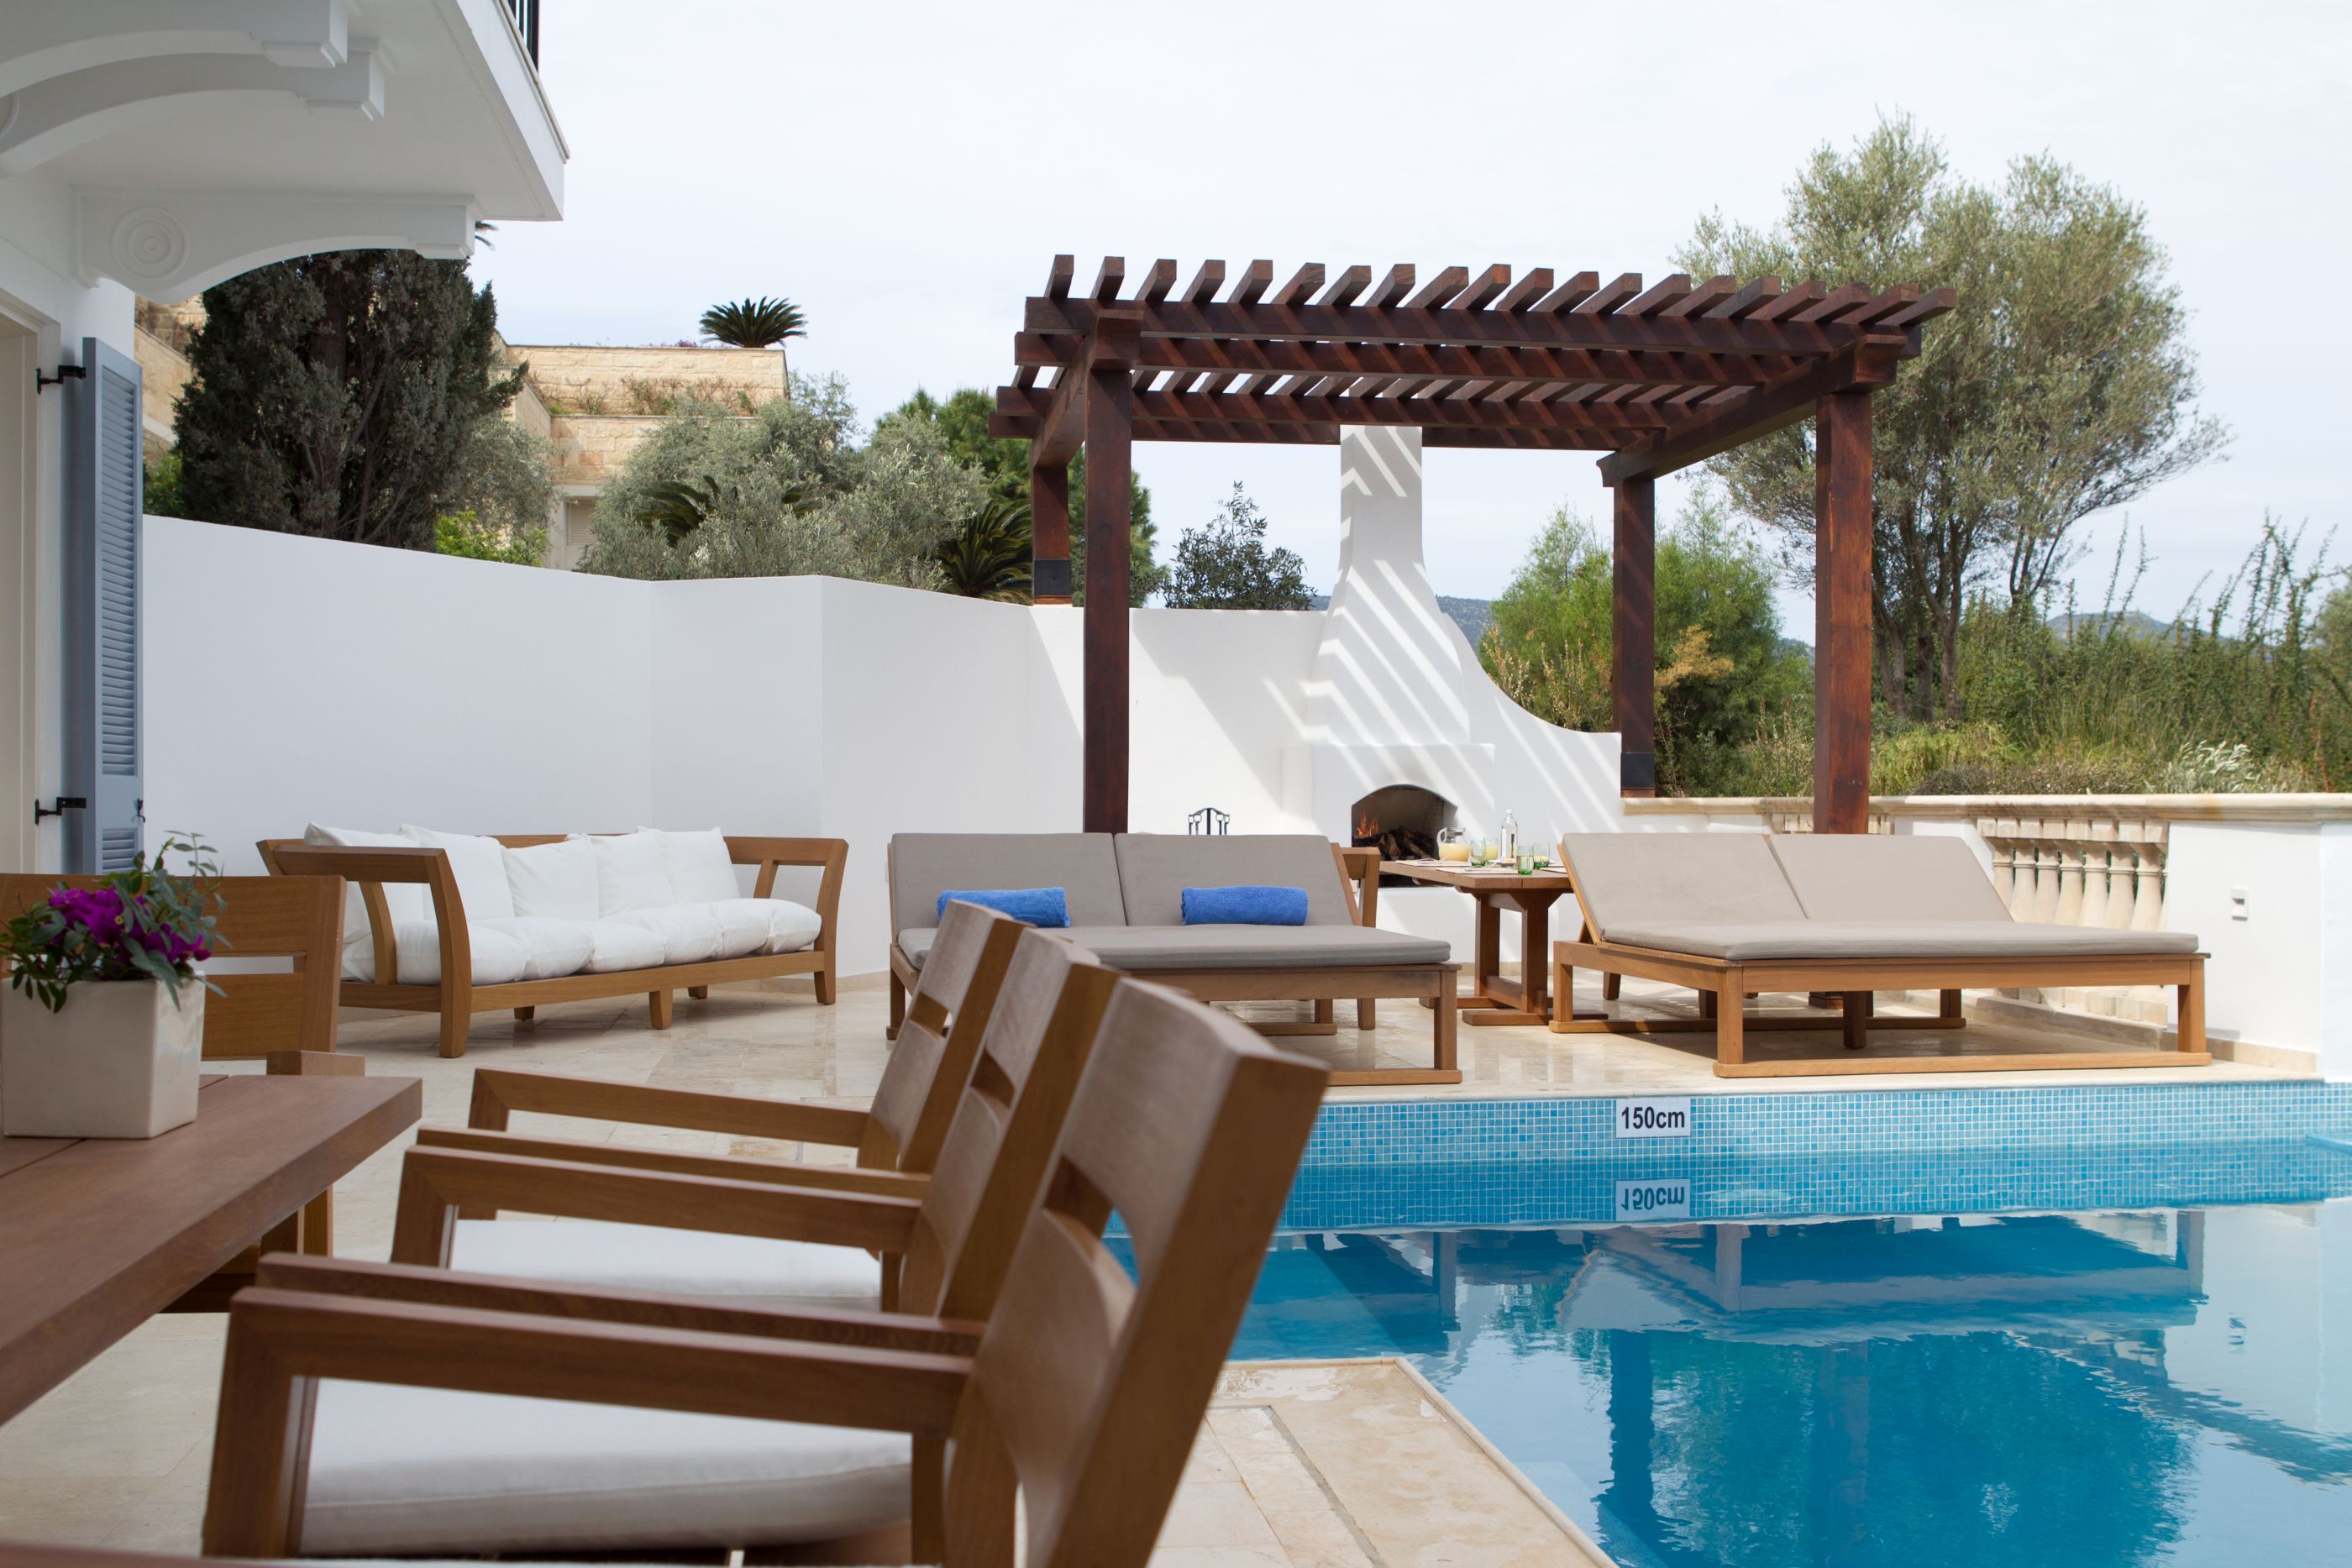 Outdoor swimming pool at the Anassa resort in Cyprus